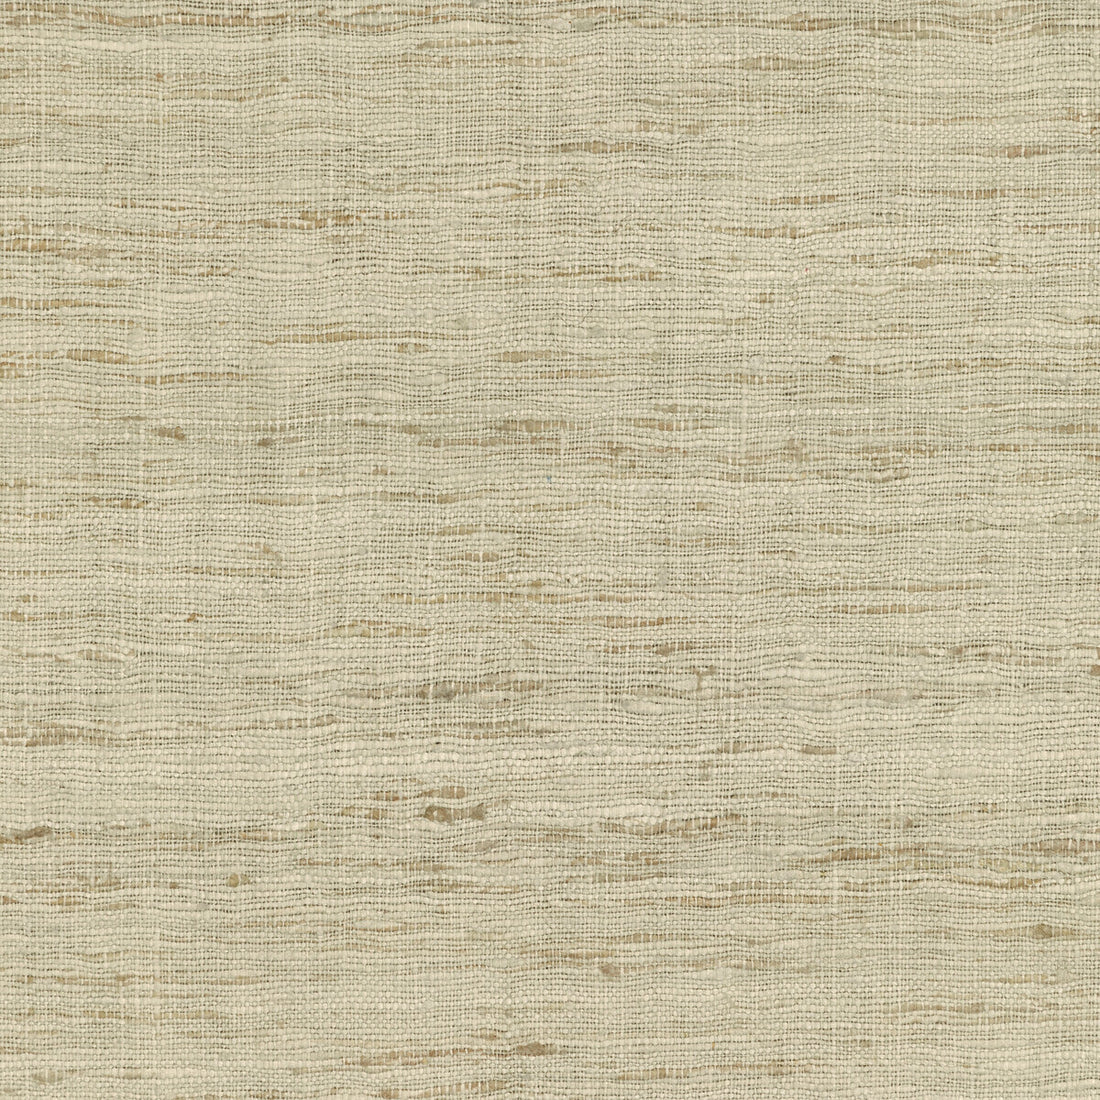 Sonoma fabric in sand color - pattern GWF-3109.106.0 - by Lee Jofa Modern in the Kelly Wearstler VI collection